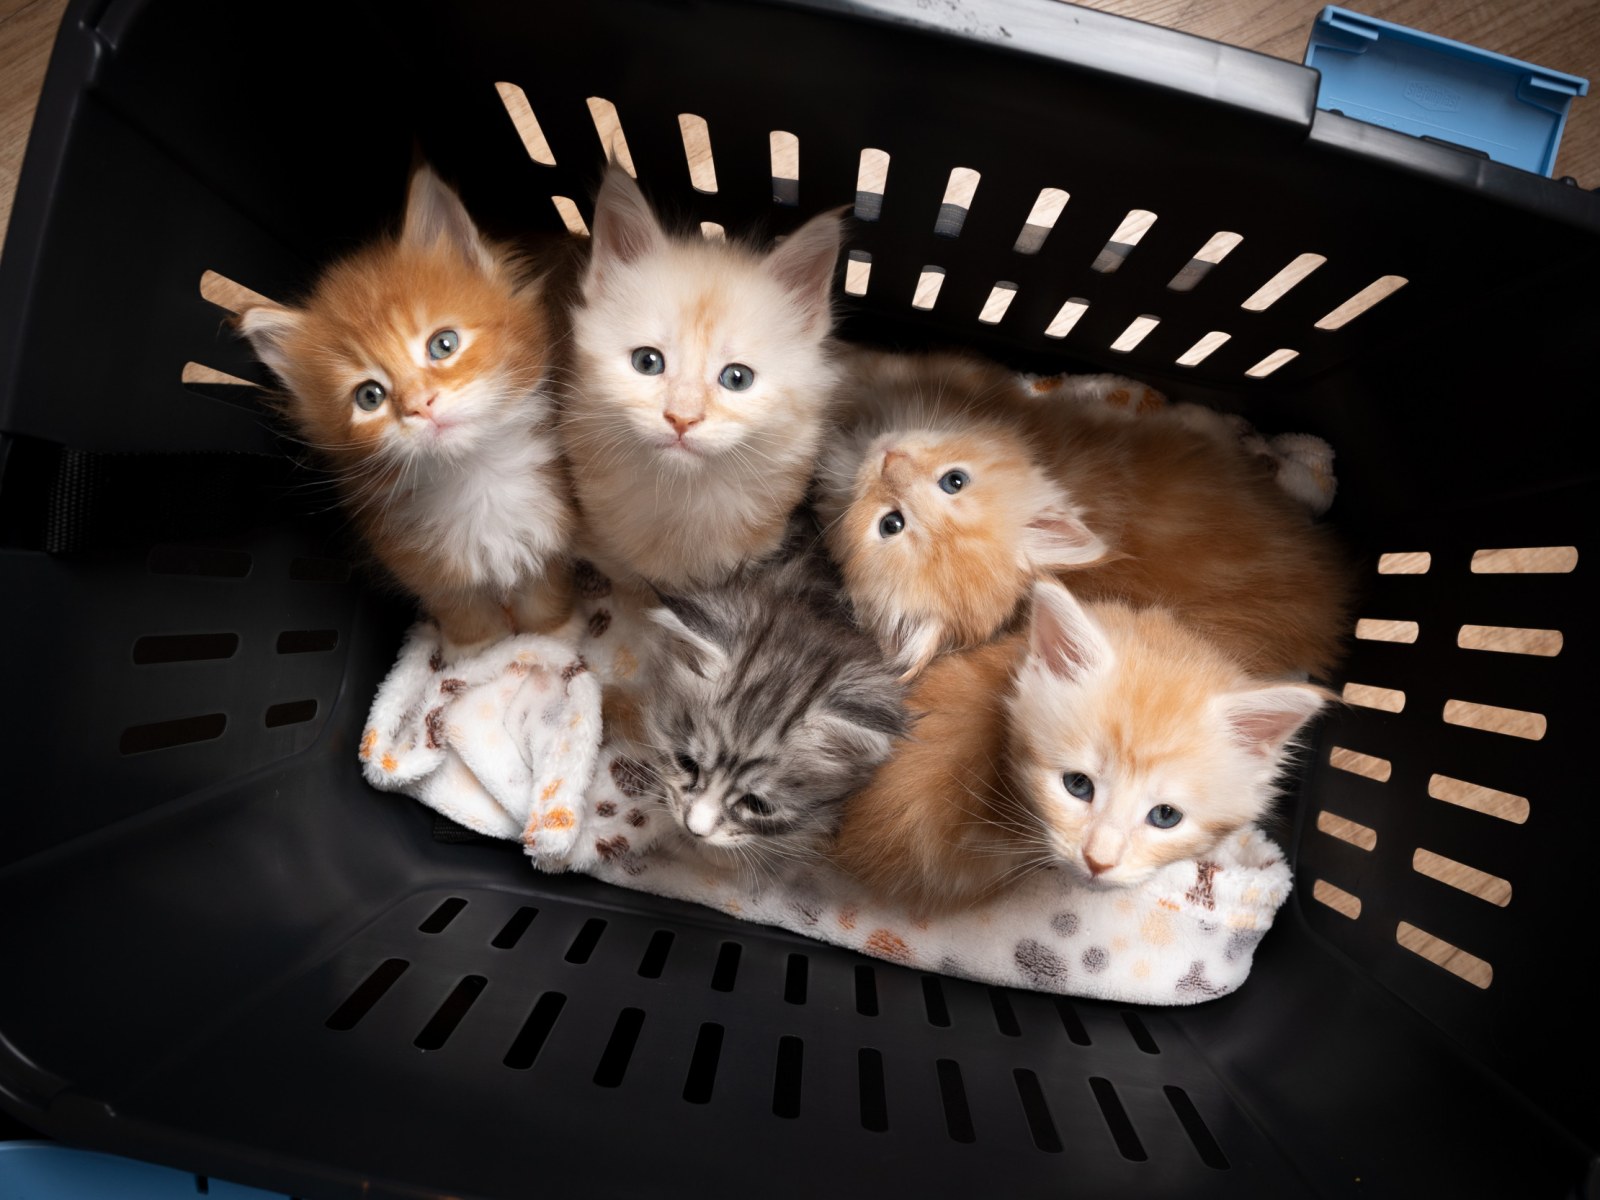 Heaven': Internet Obsesses Over Woman Fostering 30 Kittens